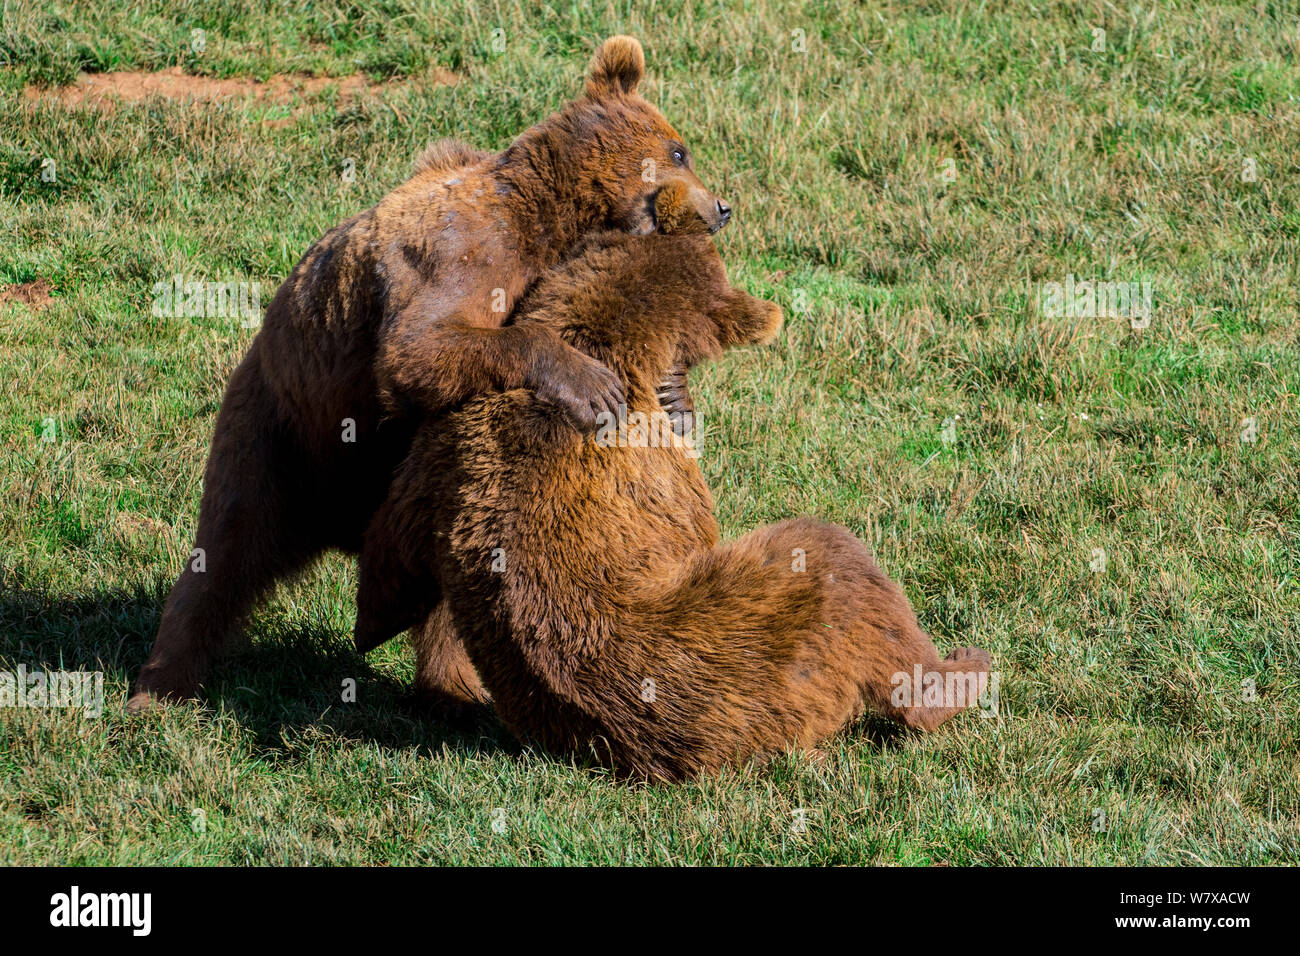 Eurasian brown bears (Ursus arctos arctos) fighting, Cabarceno Park, Cantabria, Spain, May. Captive, occurs in Northern Europe and Russia. Stock Photo